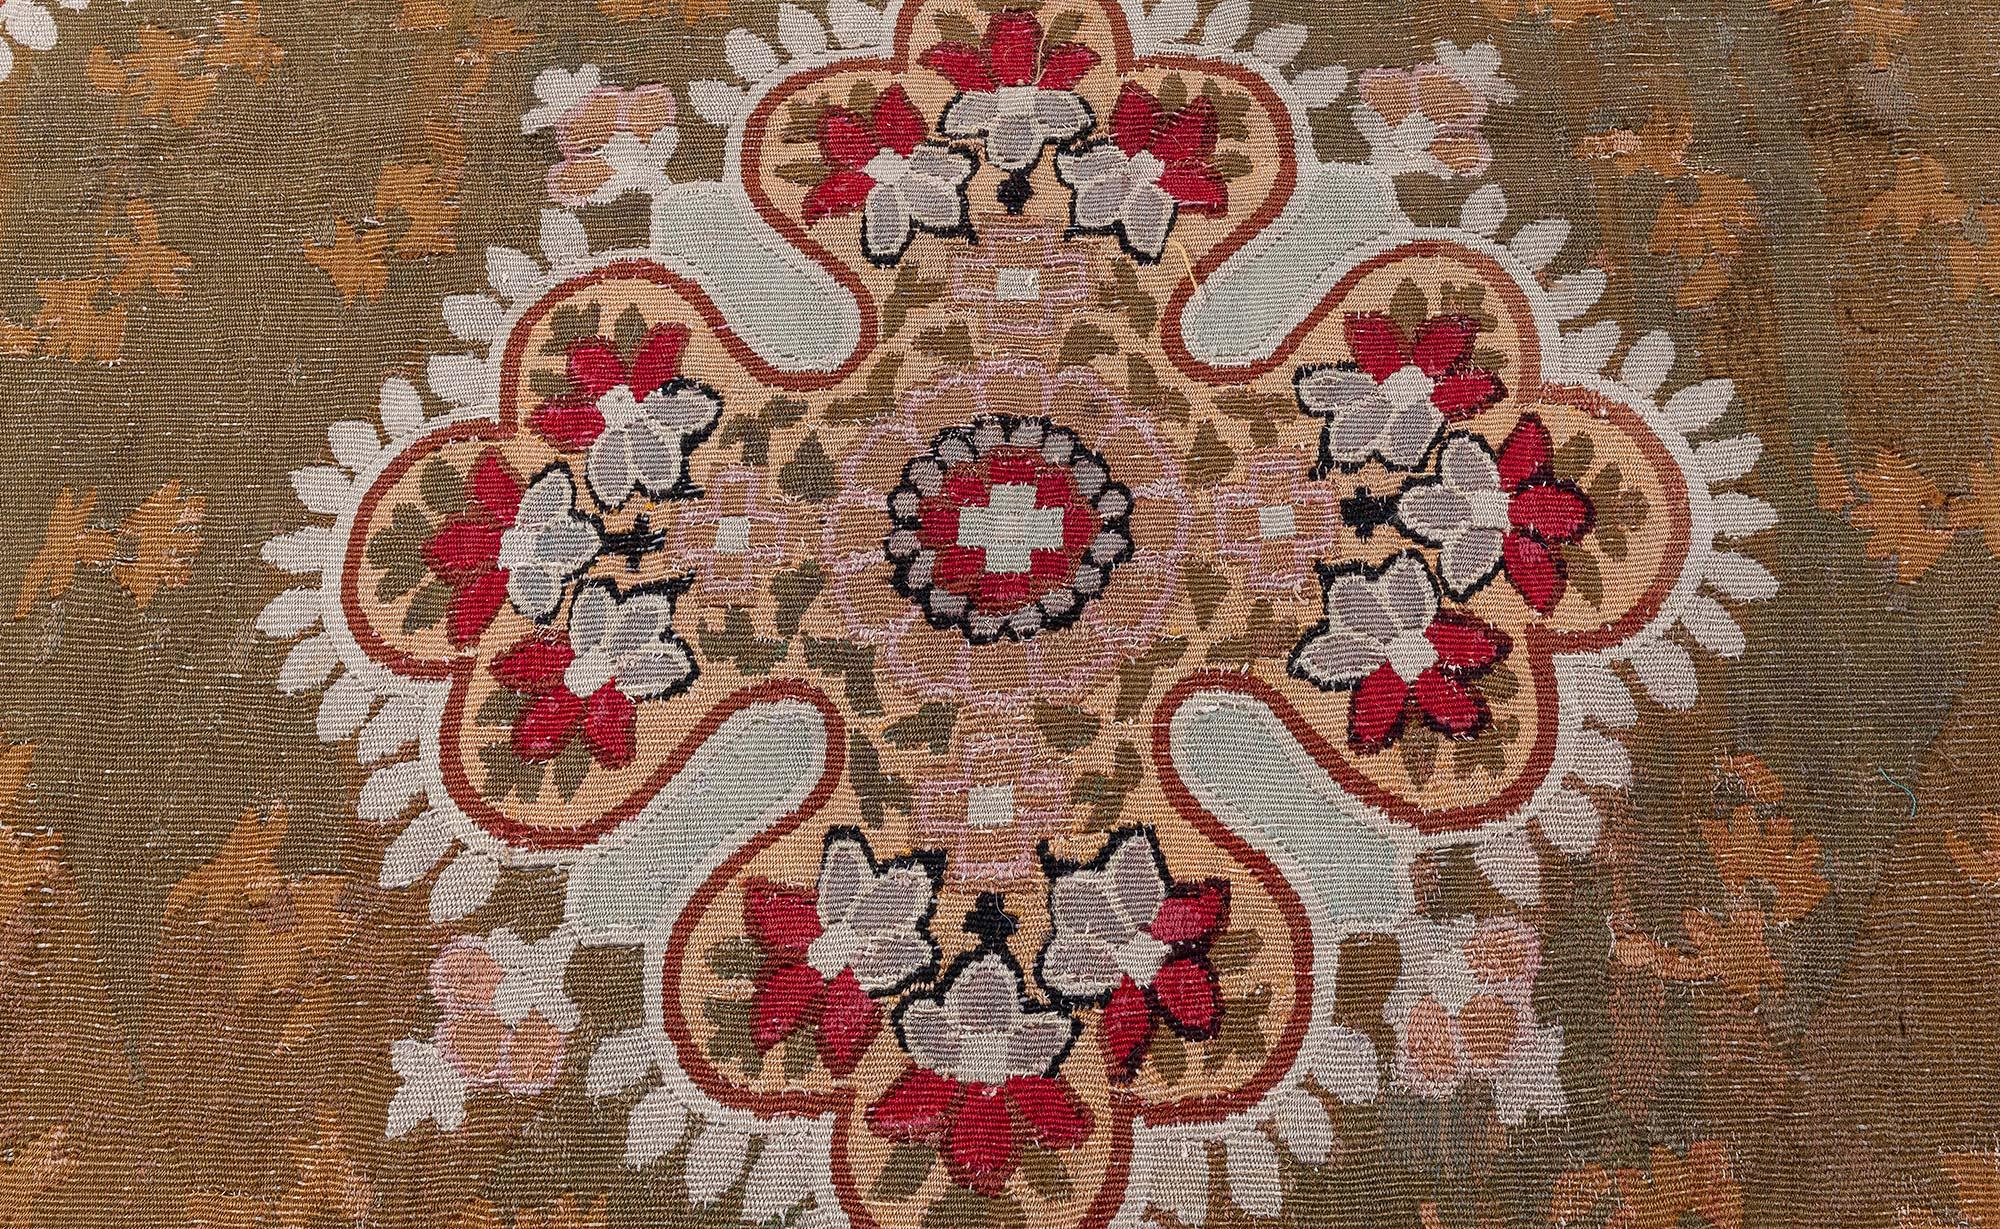 Antique French Aubusson Rug (Size Adjusted)
Size: 13'3